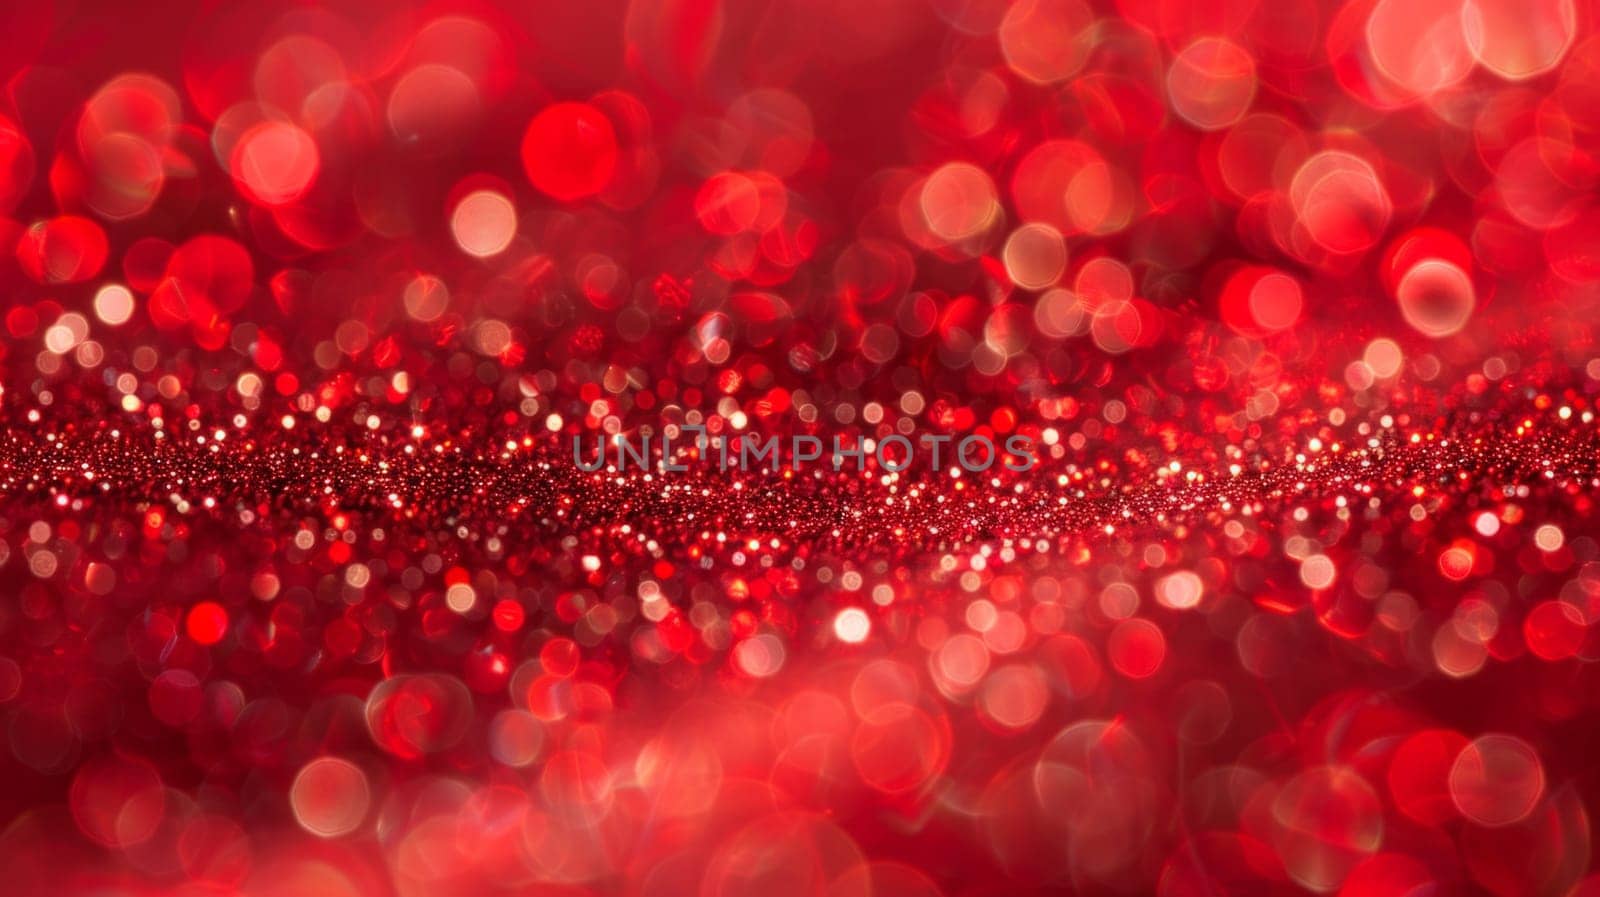 Red glitter glowing background by papatonic